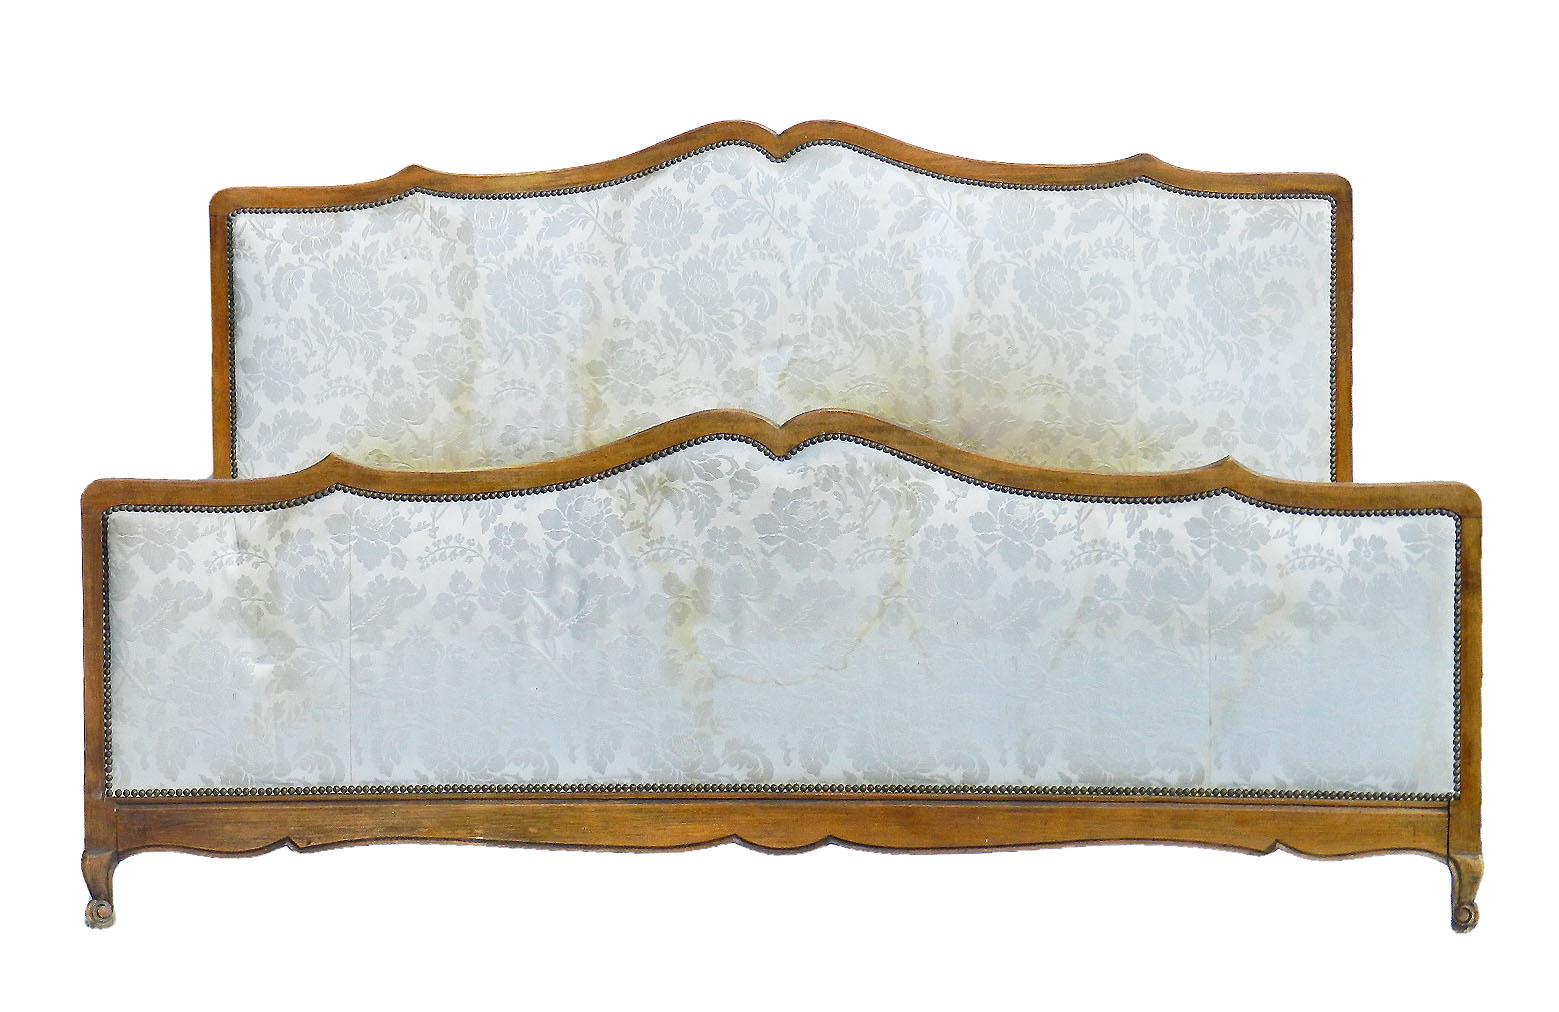 Rare US Eastern King size or UK Emperor size  French Antique Bed 
Price includes recovering and customization excludes cost of fabric
c1920 Louis revival
We can also adapt the length of this bed to adapt to a Californian King or whatever length you